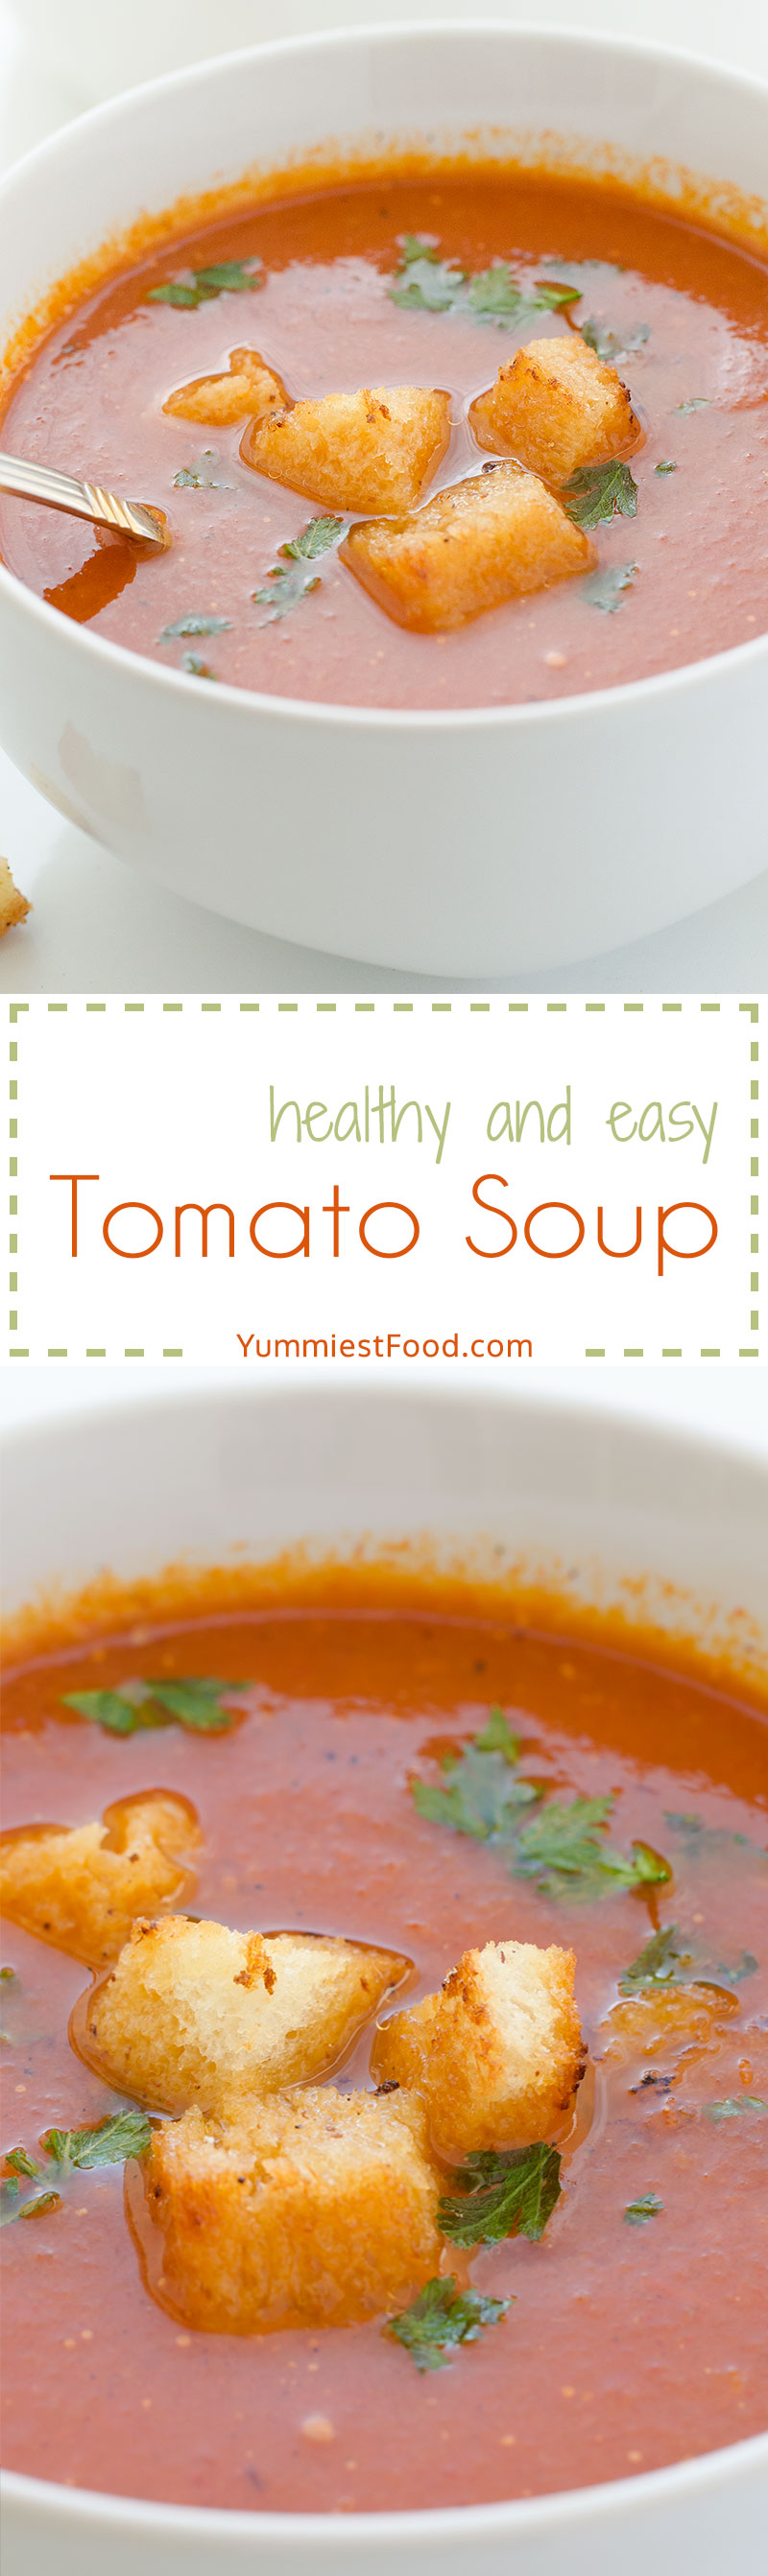 Tomato Soup - Try to make this tomato soup on my way, your family will stay speechless and you will cook it again and again